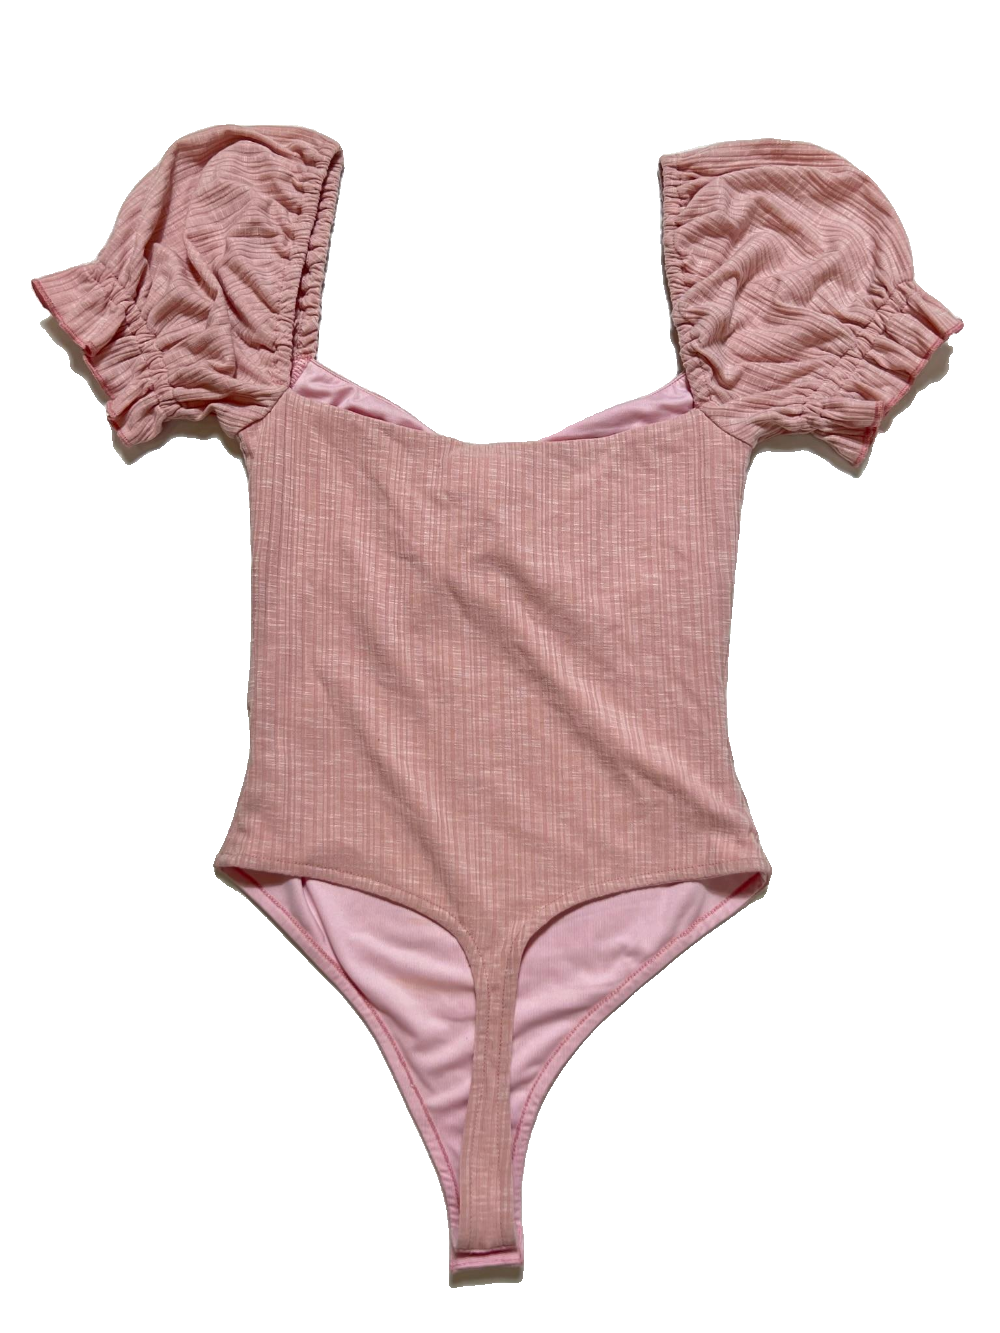 Privacy Please - Pink Bodysuit